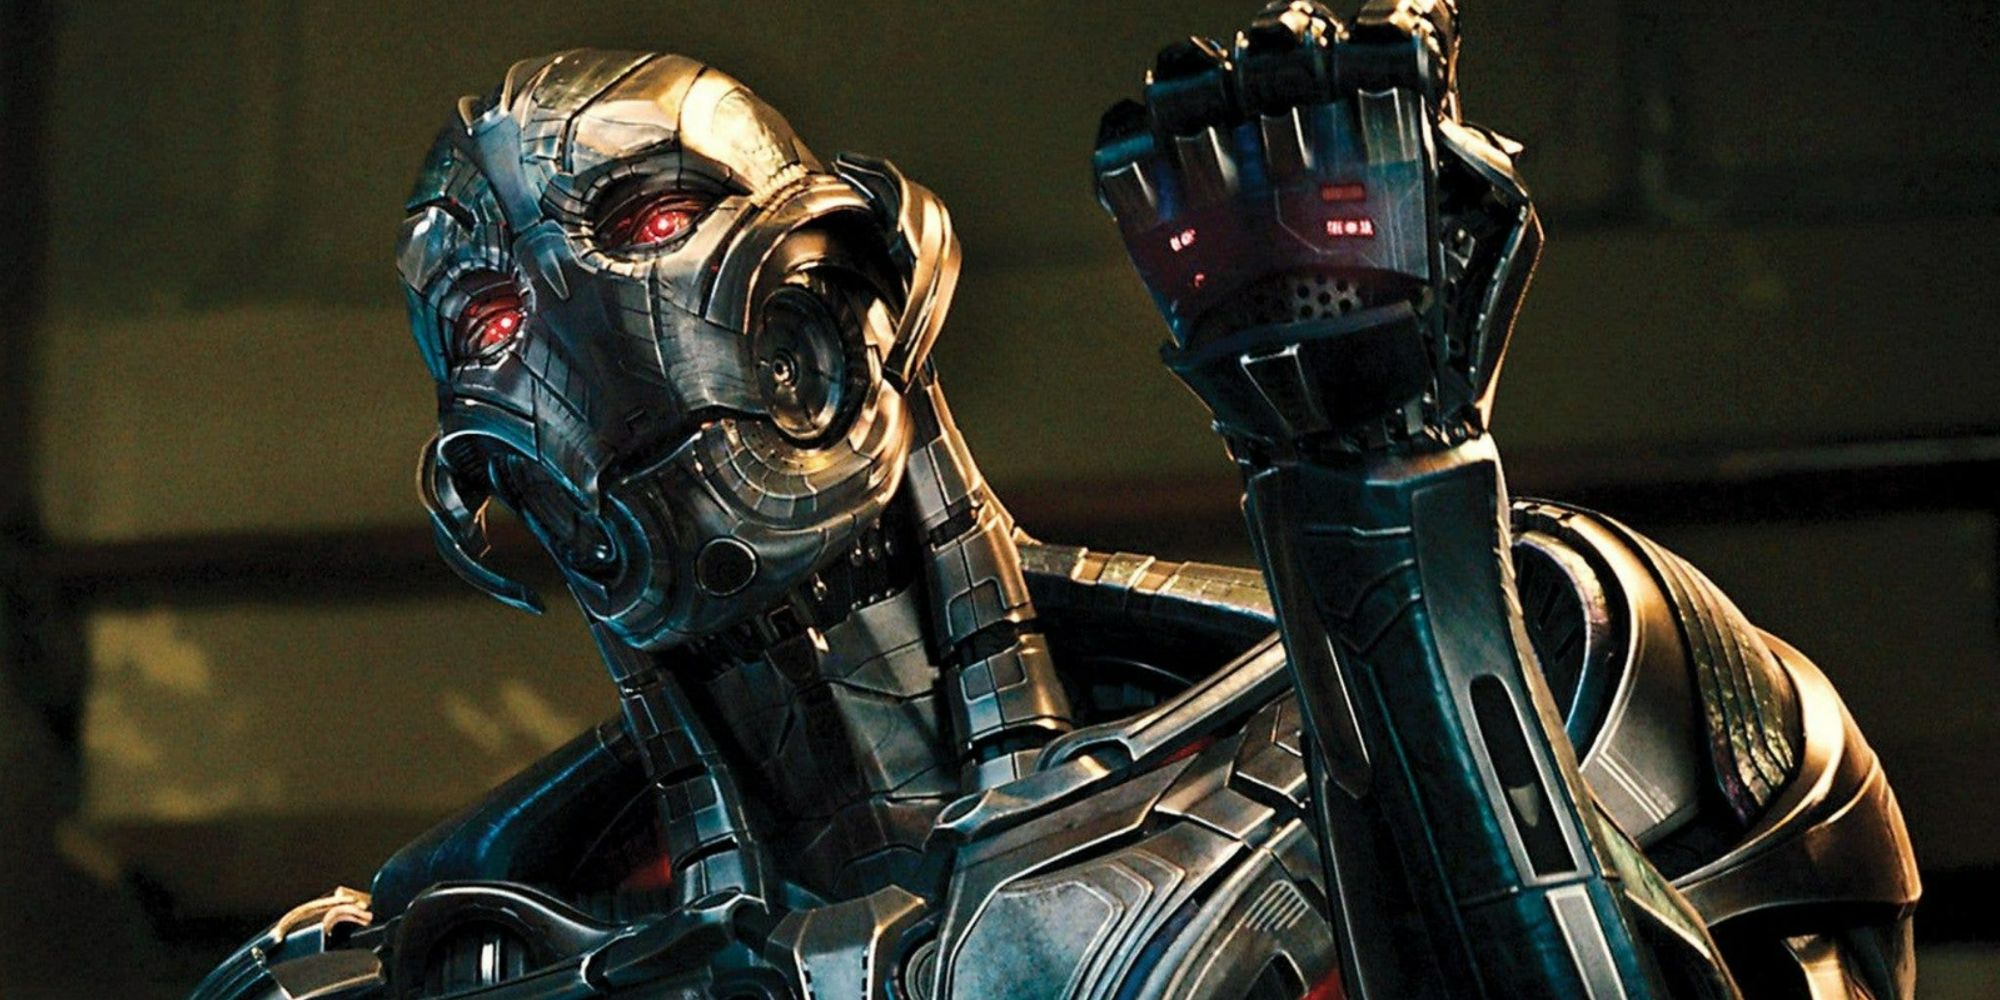 Ultron prepares for the attack in “Avengers: Age Of Ultron”.